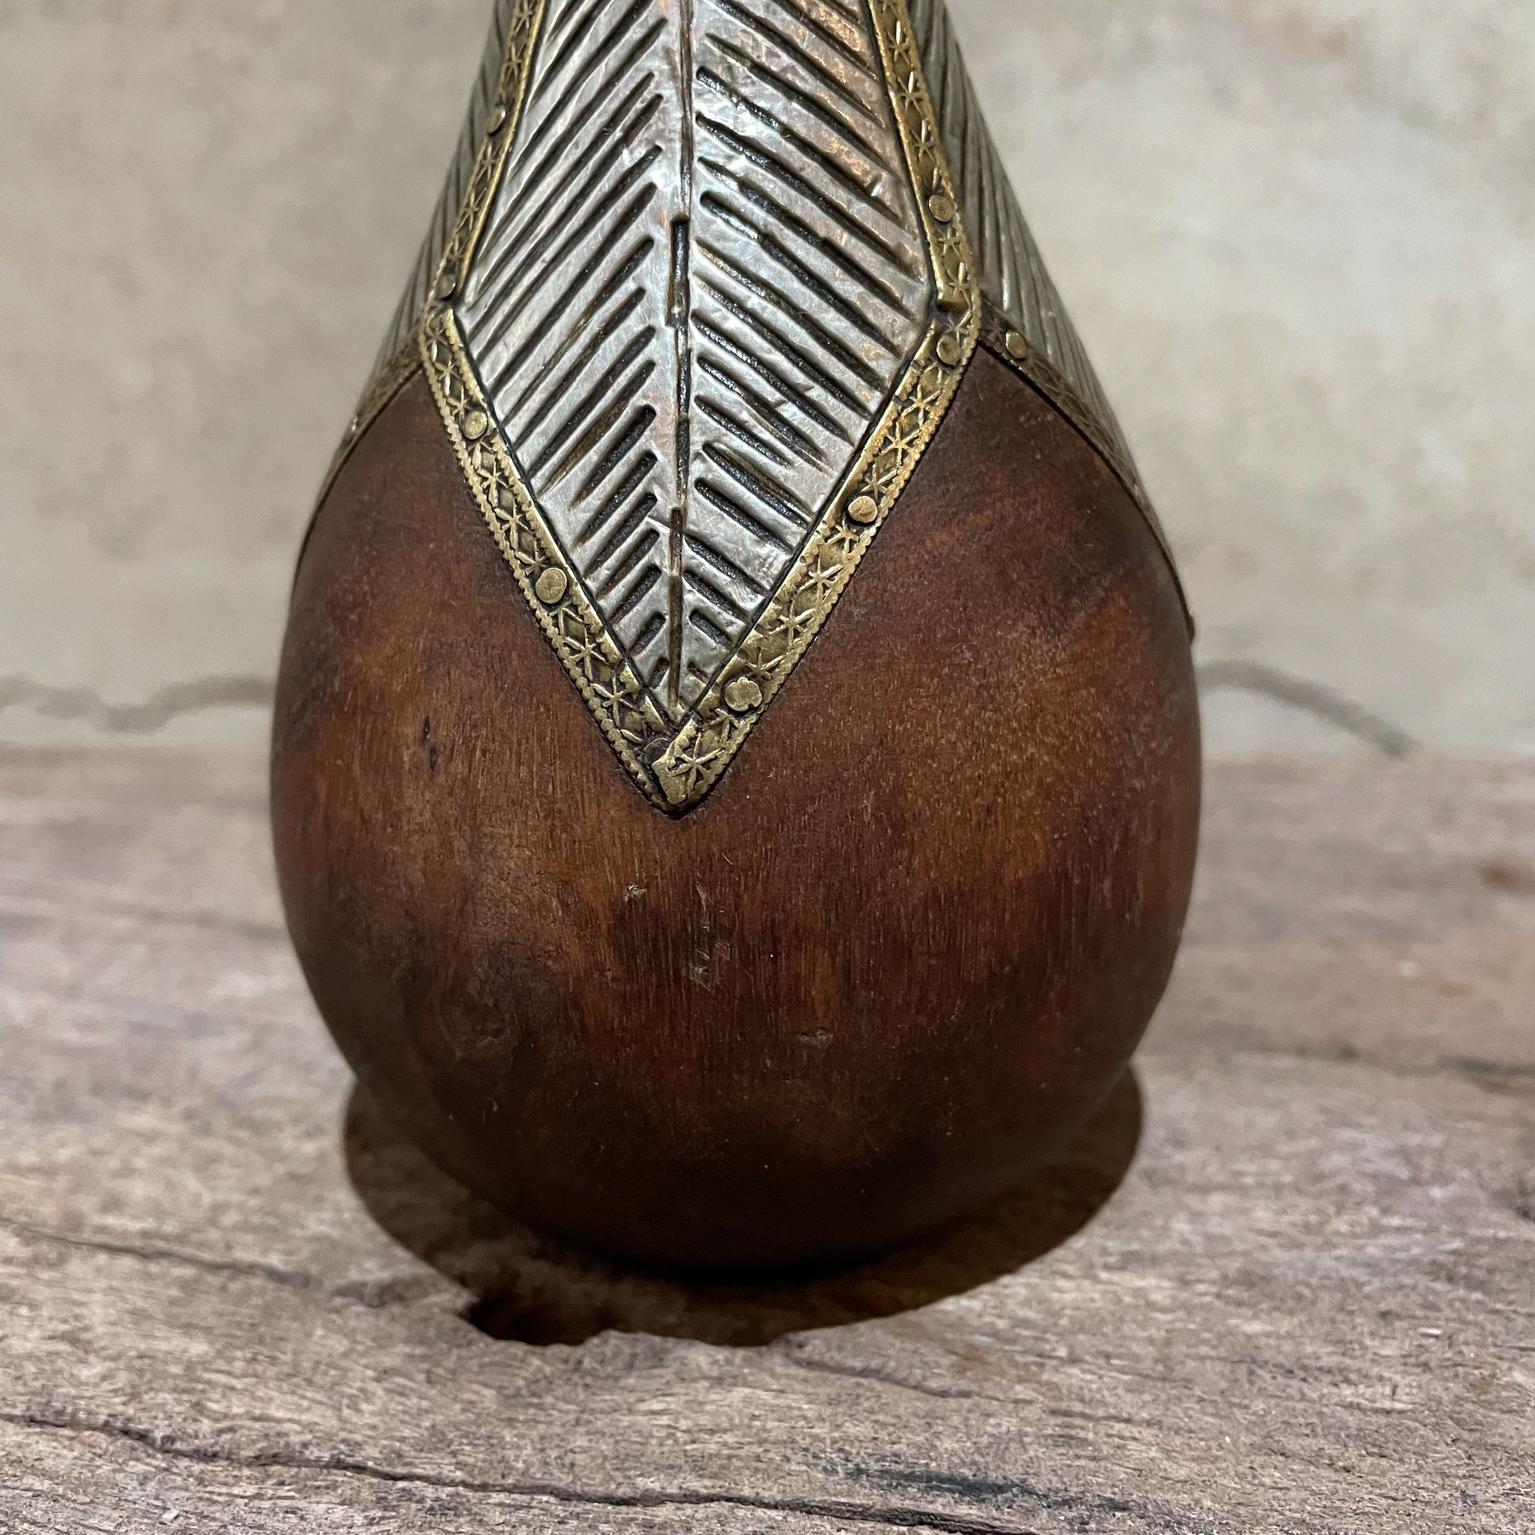 Mid-Century Modern Vintage Decorative Pear Figurine Crafted in Wood and Hammered Metal Mexico 1970s